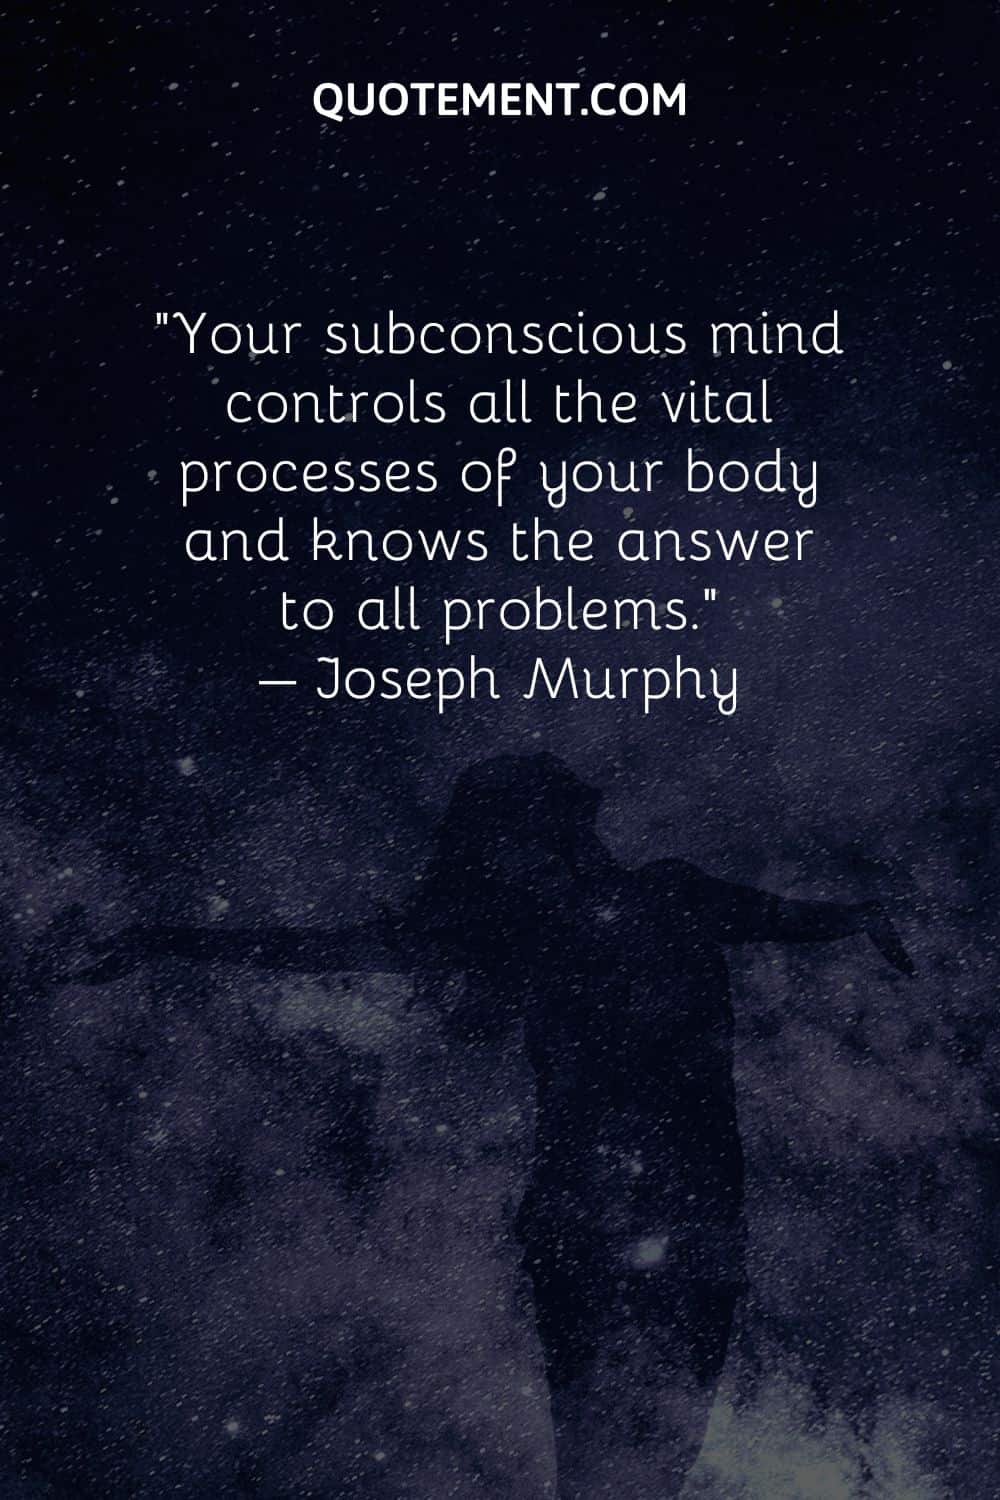 Your subconscious mind controls all the vital processes of your body and knows the answer to all problems